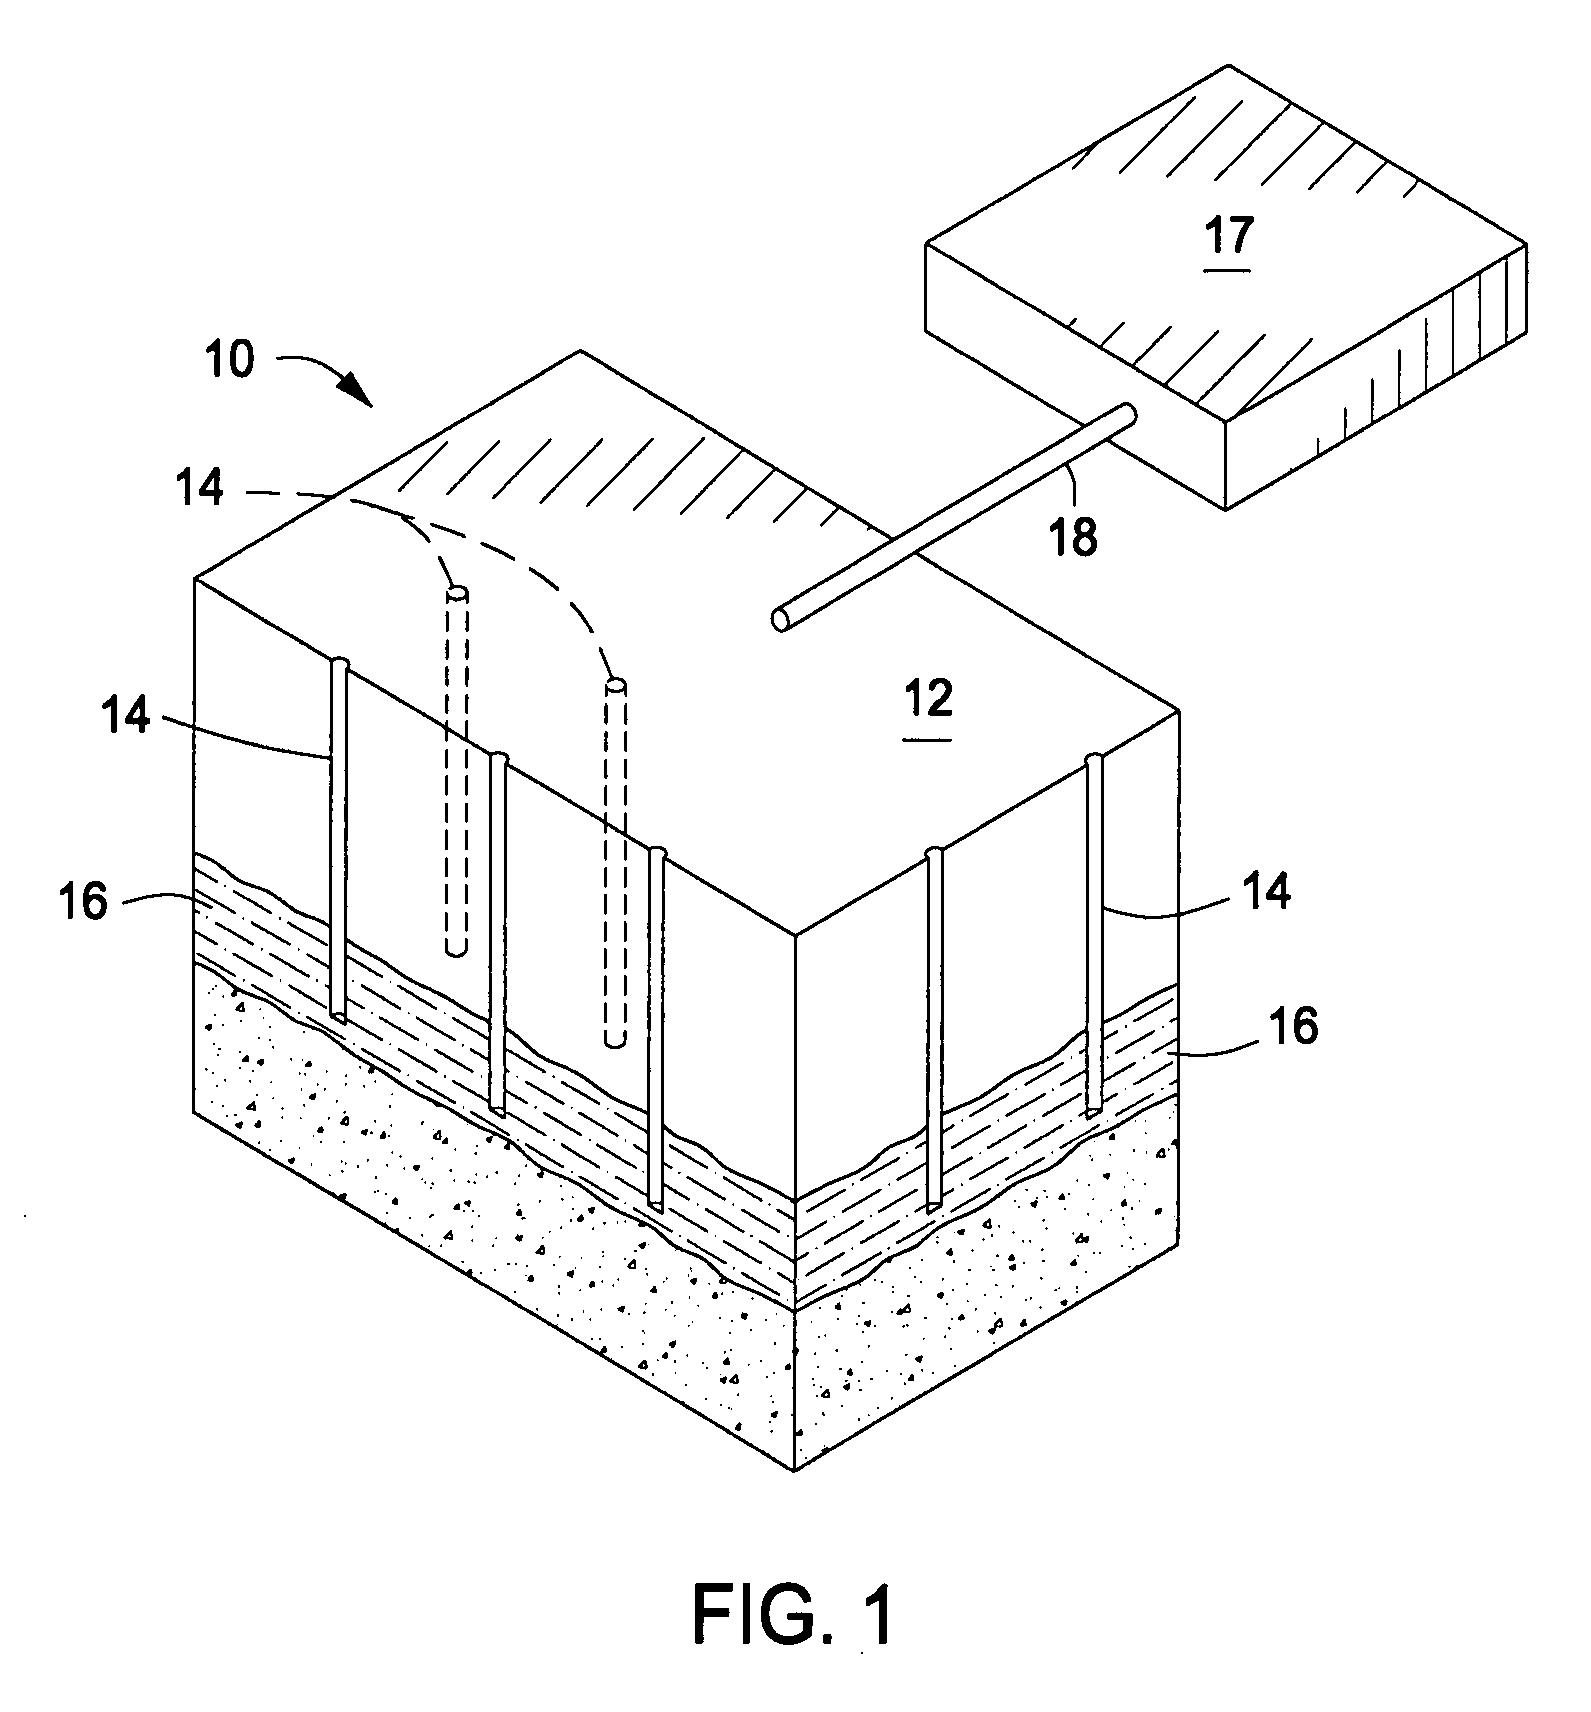 Method of developing a subsurface freeze zone using formation fractures